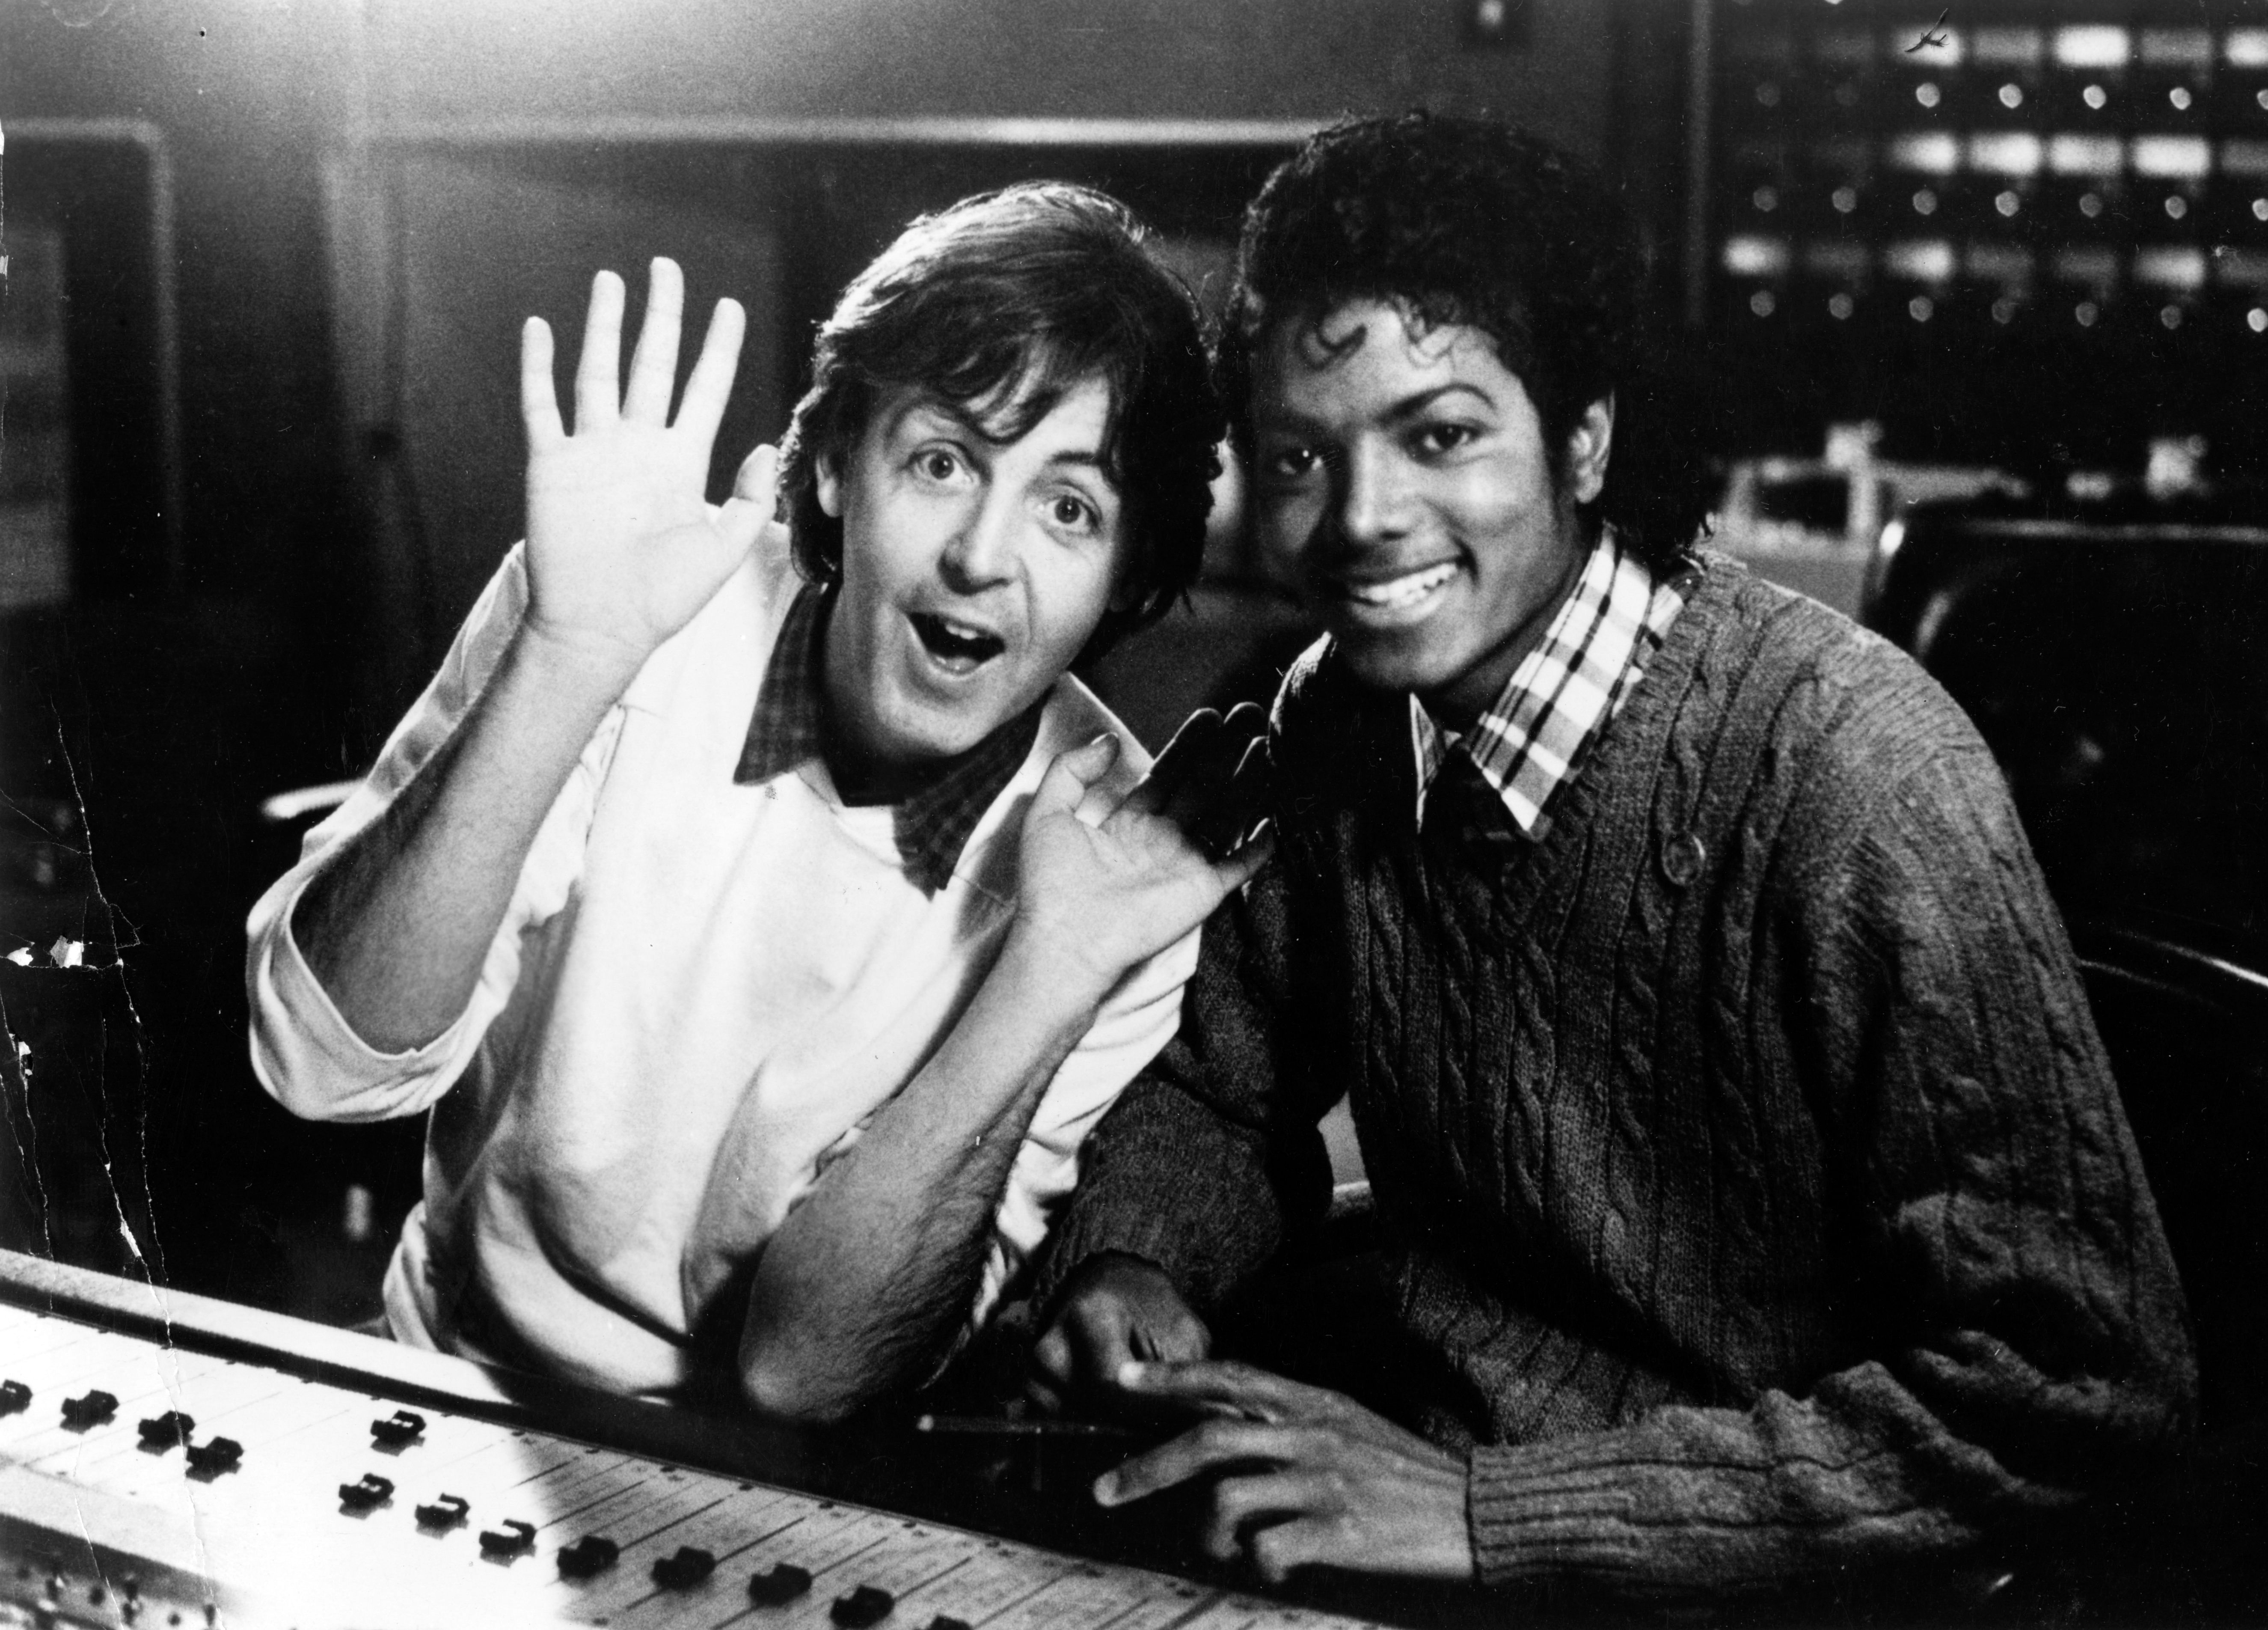 African American musician Michael Jackson and Paul McCartney in the studio, 1980. | Getty Images